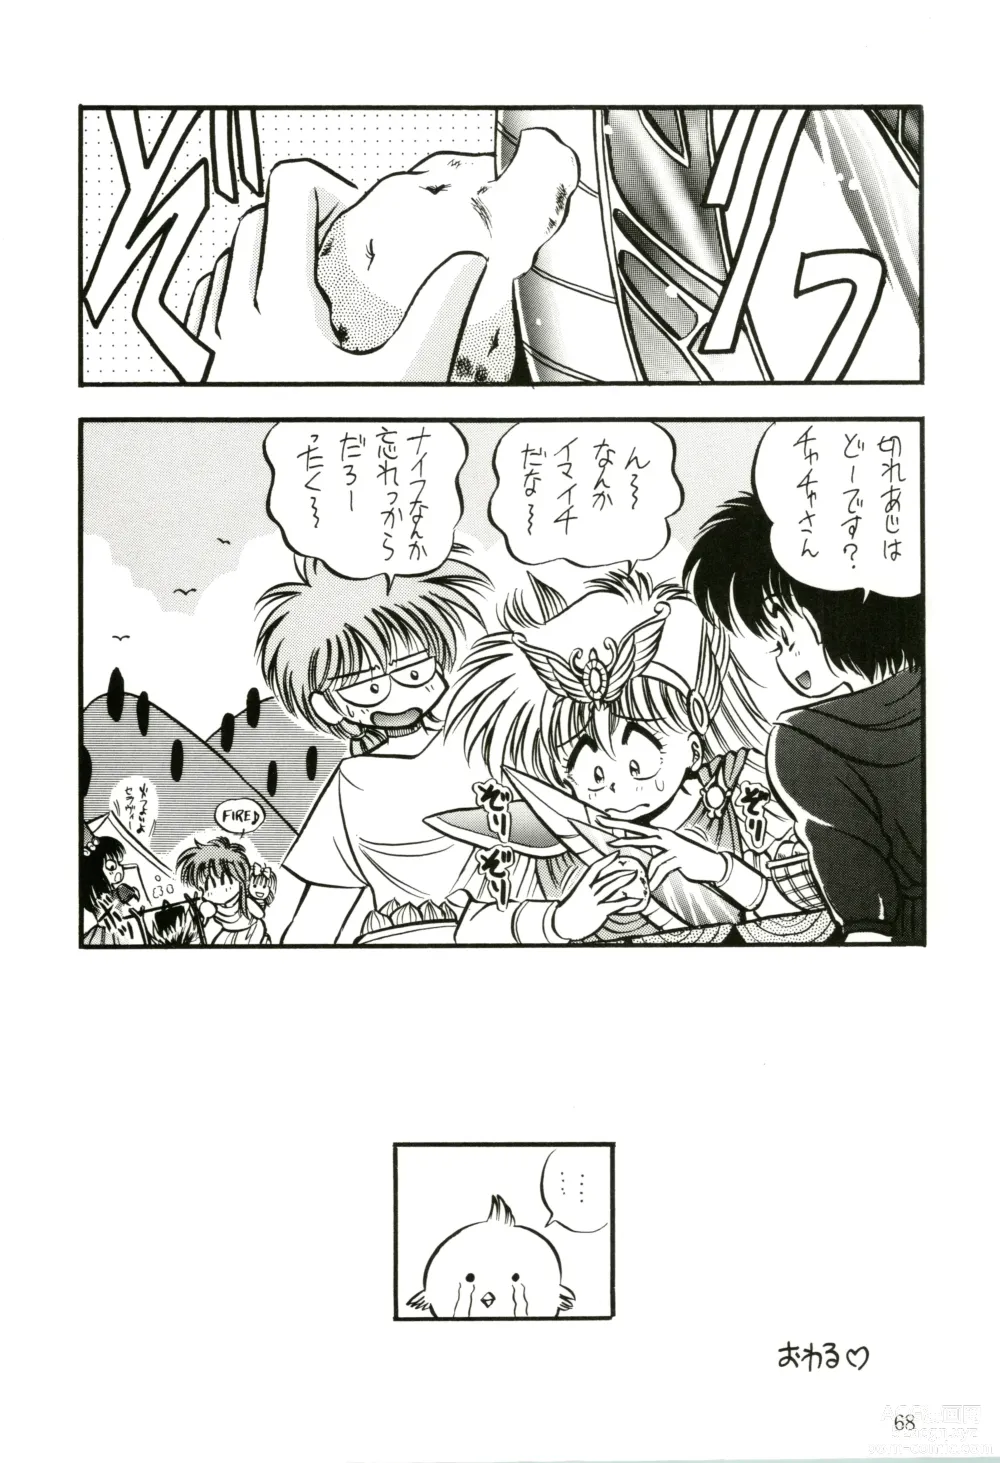 Page 70 of doujinshi PROMINENT 4